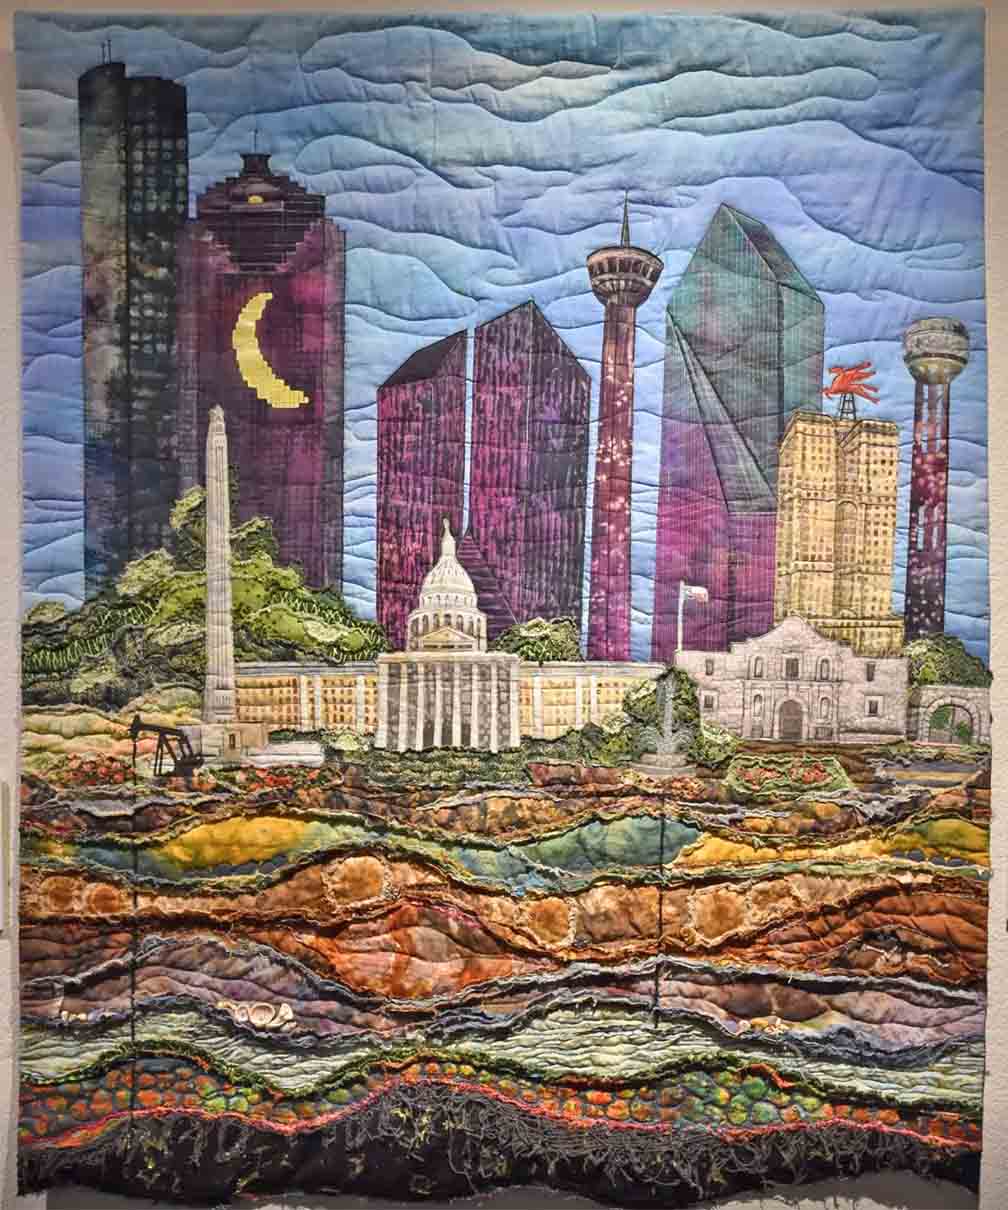 vertically oriented art quilt with images of Texas buildings such as the Alamo and Capital sitting on the oil rich sub layers of dirt.